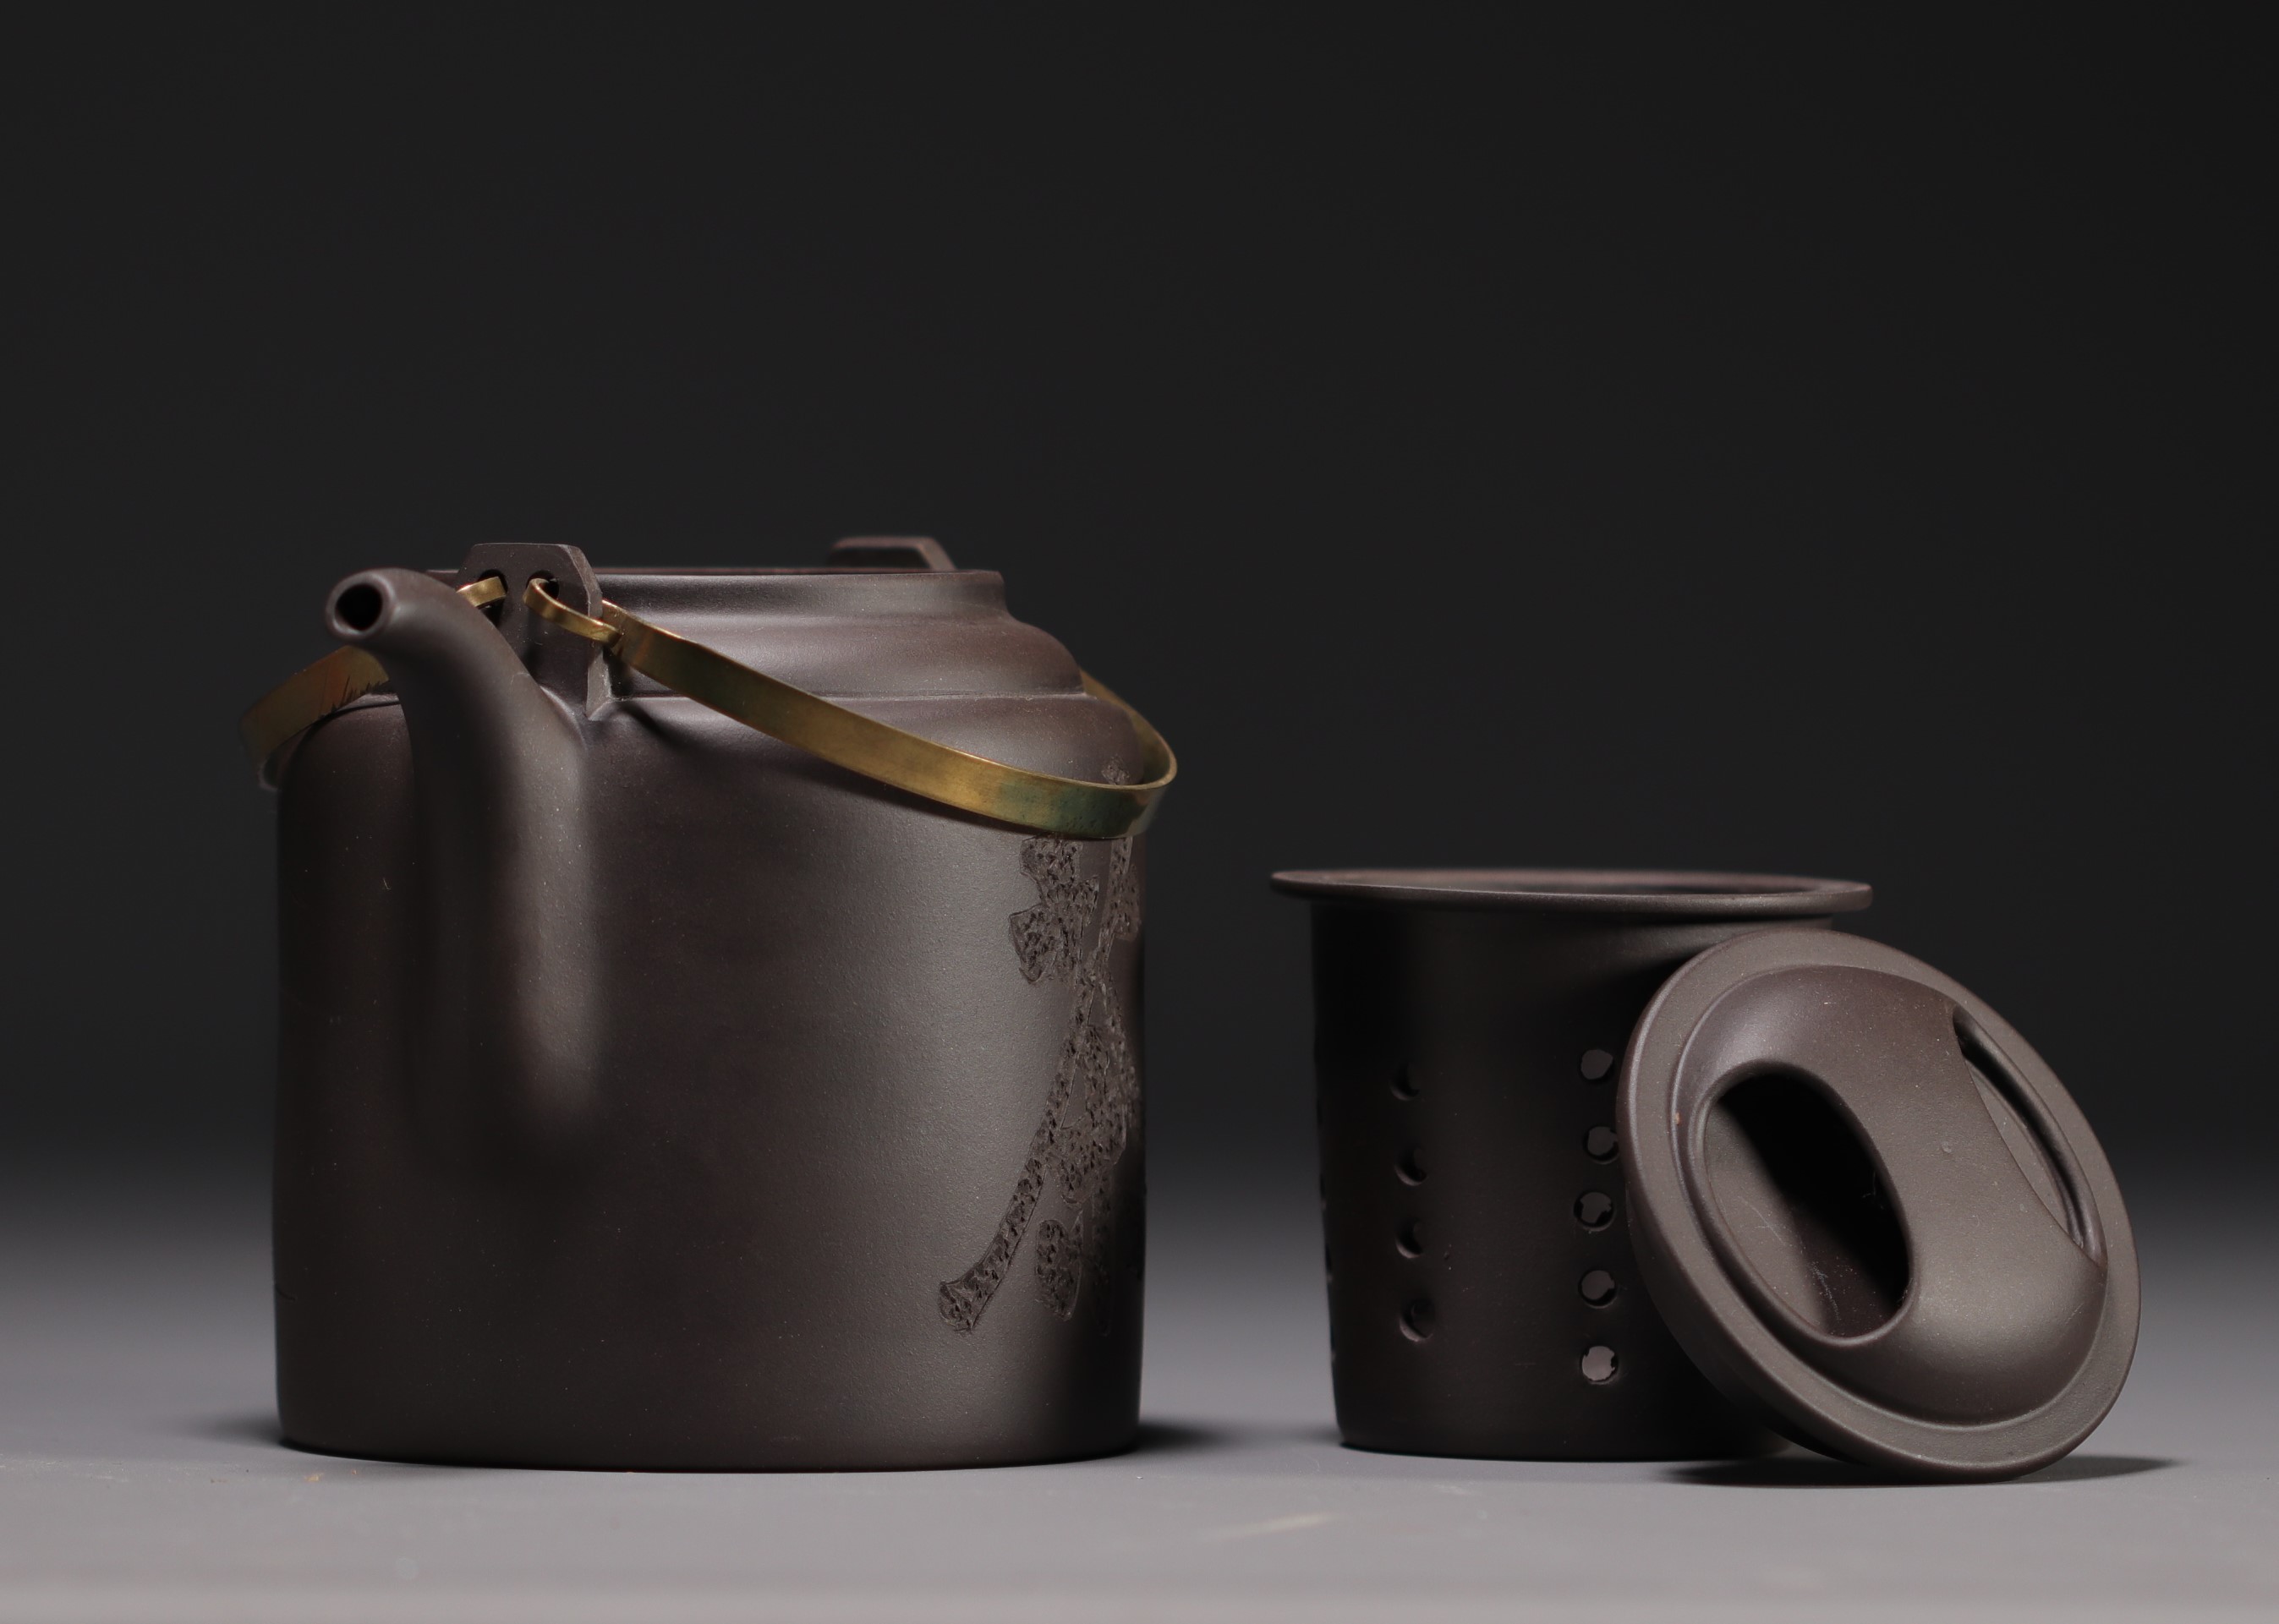 China - Yixing violet clay teapot in its box, 20th century. - Image 5 of 5